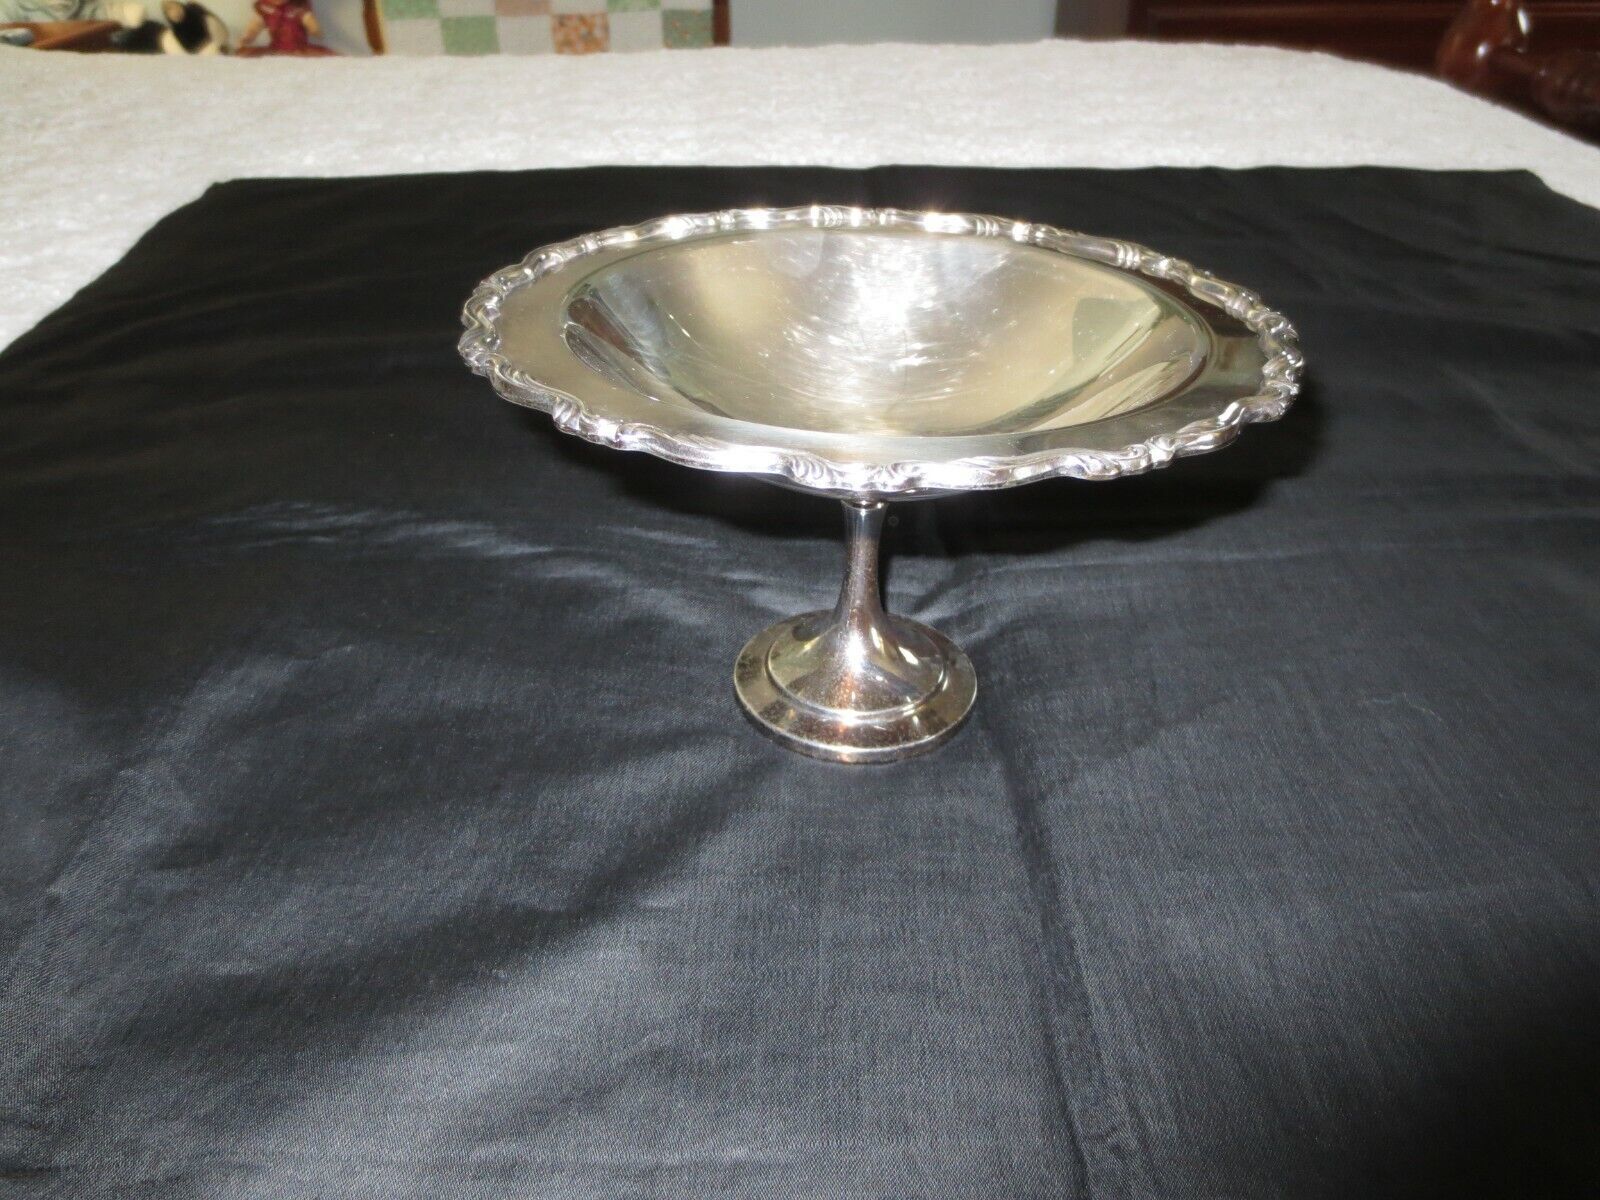 Primary image for 1970's Wm. A. Rogers STEMMED GEORGIAN SILVERPLATE COMPOTE DISH  - 8" x 4.5" high